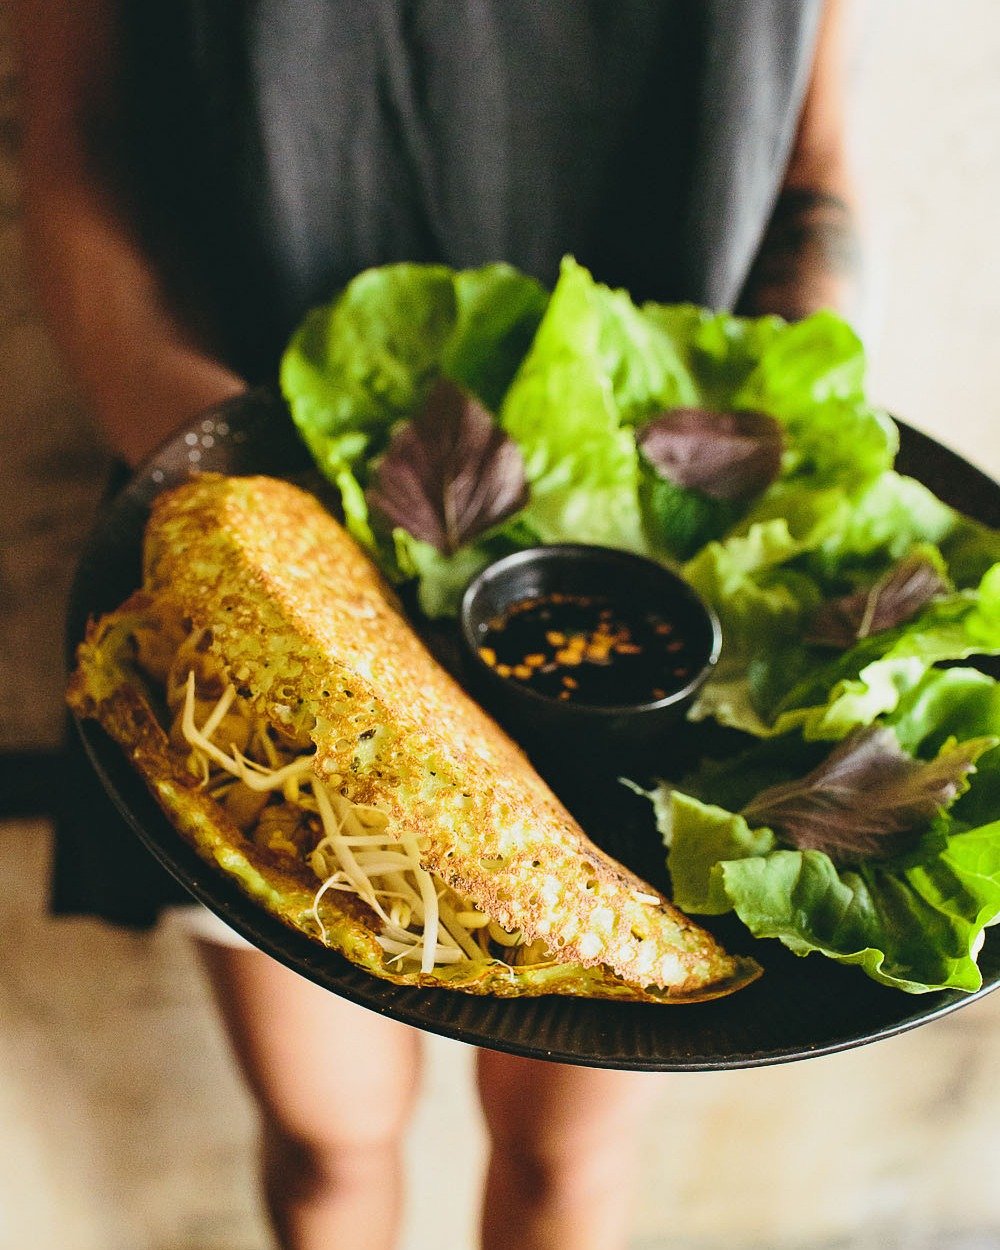 IT'S ALMOST THAT TIME OF THE WEEK AGAIN - CRISPY CR&Ecirc;PE &lsquo;B&Aacute;NH X&Egrave;O&rsquo; MONDAYS 🍳

Order one for yourself, or share one with a LOVED ONE. Dive into a plate of our CRISPY turmeric infused cr&ecirc;pe, filled with LUSCIOUS sl